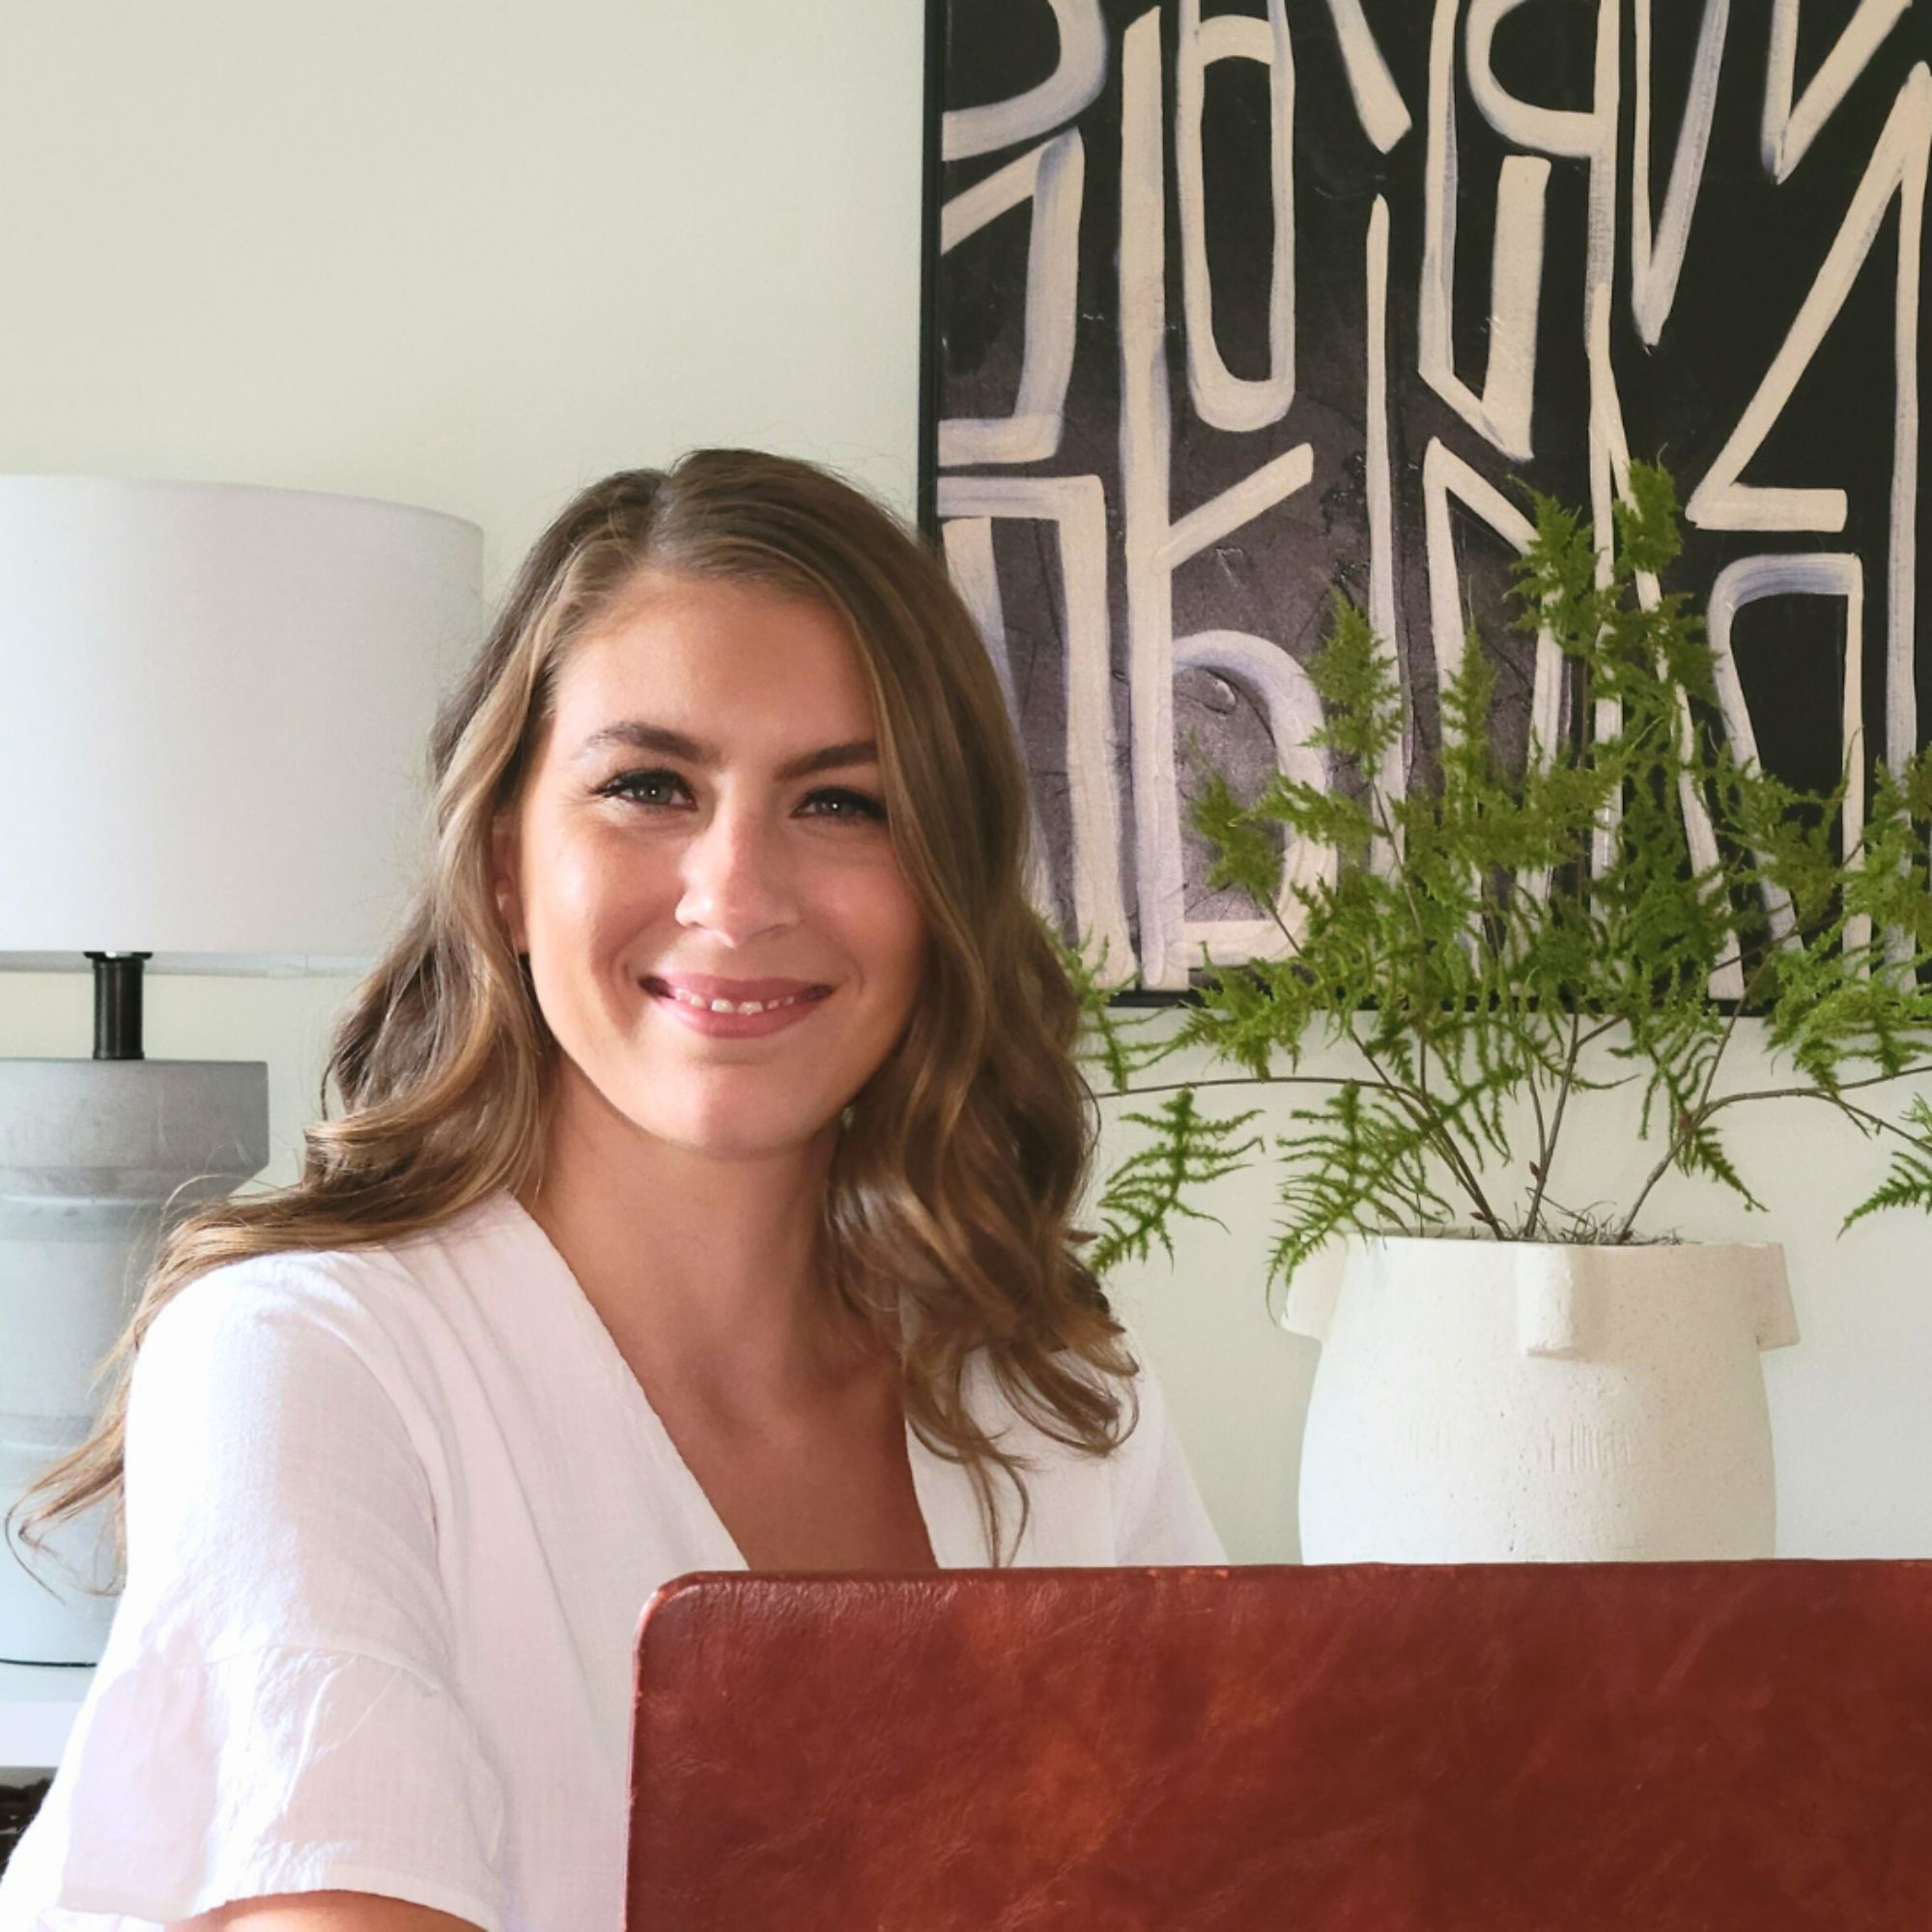 A picture of Kristin Patrician, a brunette woman in a white t-shirt sitting in front of a red brown leather laptop, with green foliage , black and white artwork, and a gray and white ceramic lamp behind her